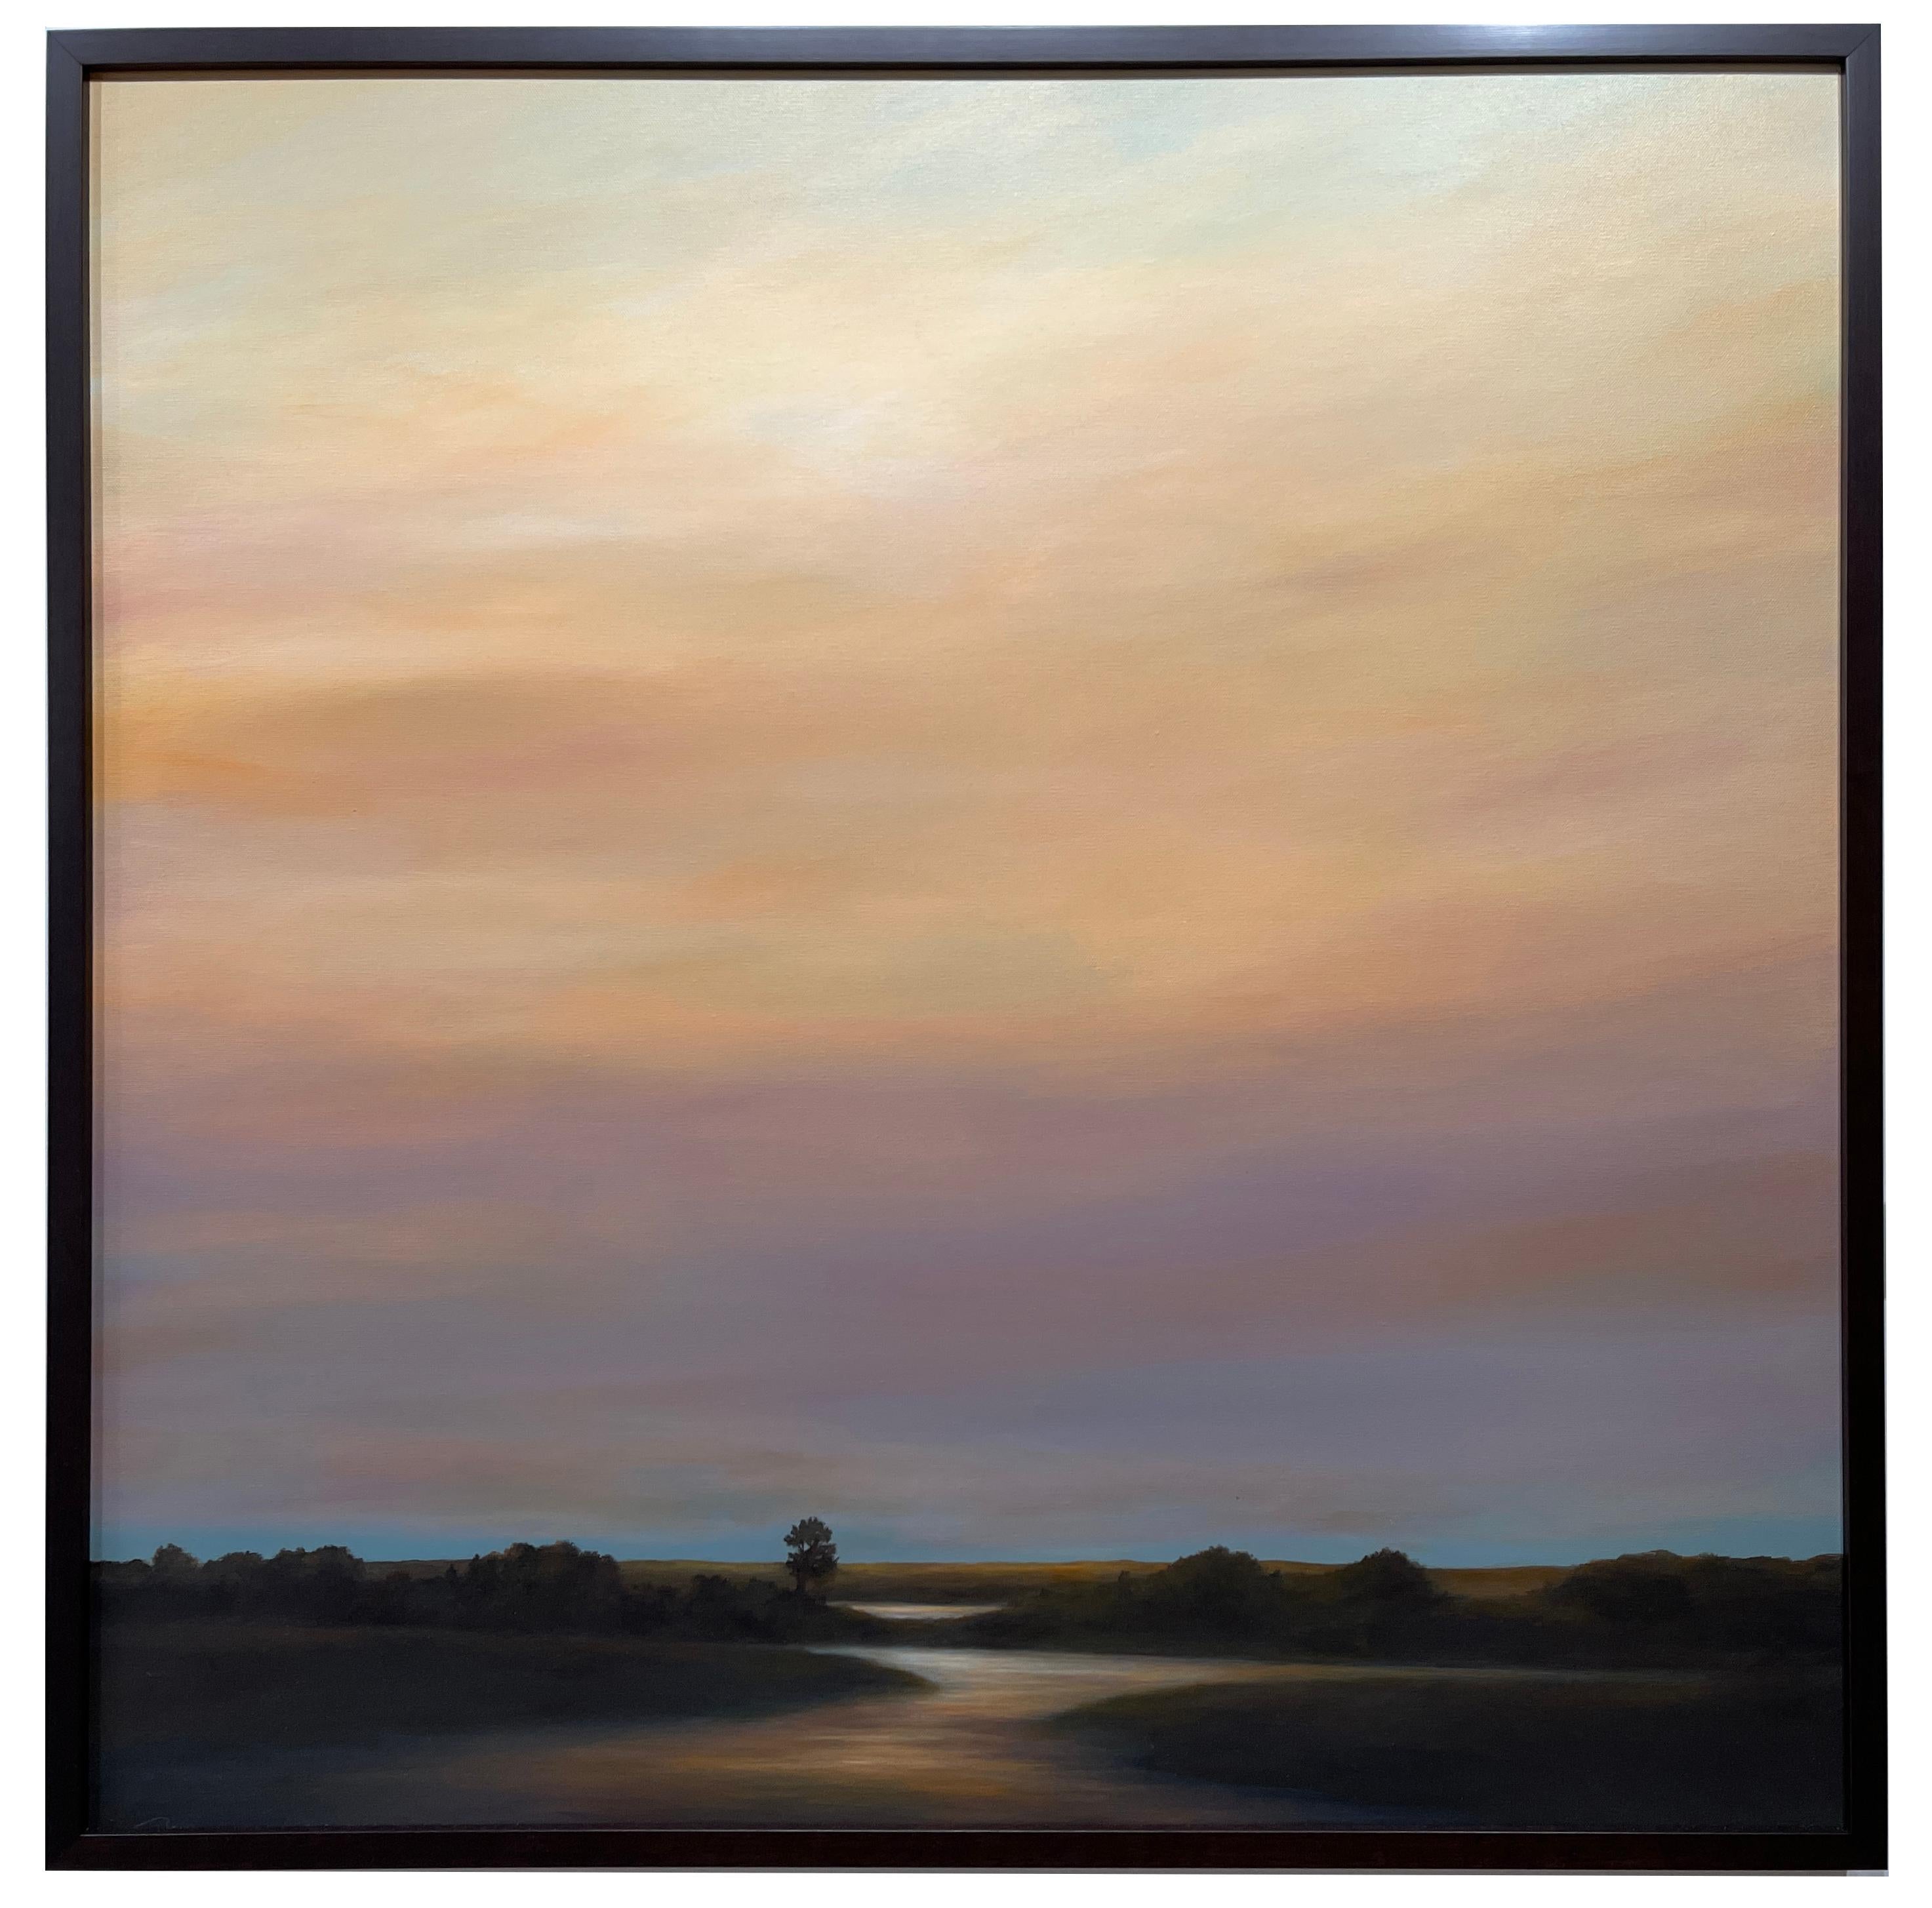 The Quiet Glow  Expansive Horizon in Hues of Gold & Purple, Original Oil, Framed - Painting by Ahzad Bogosian